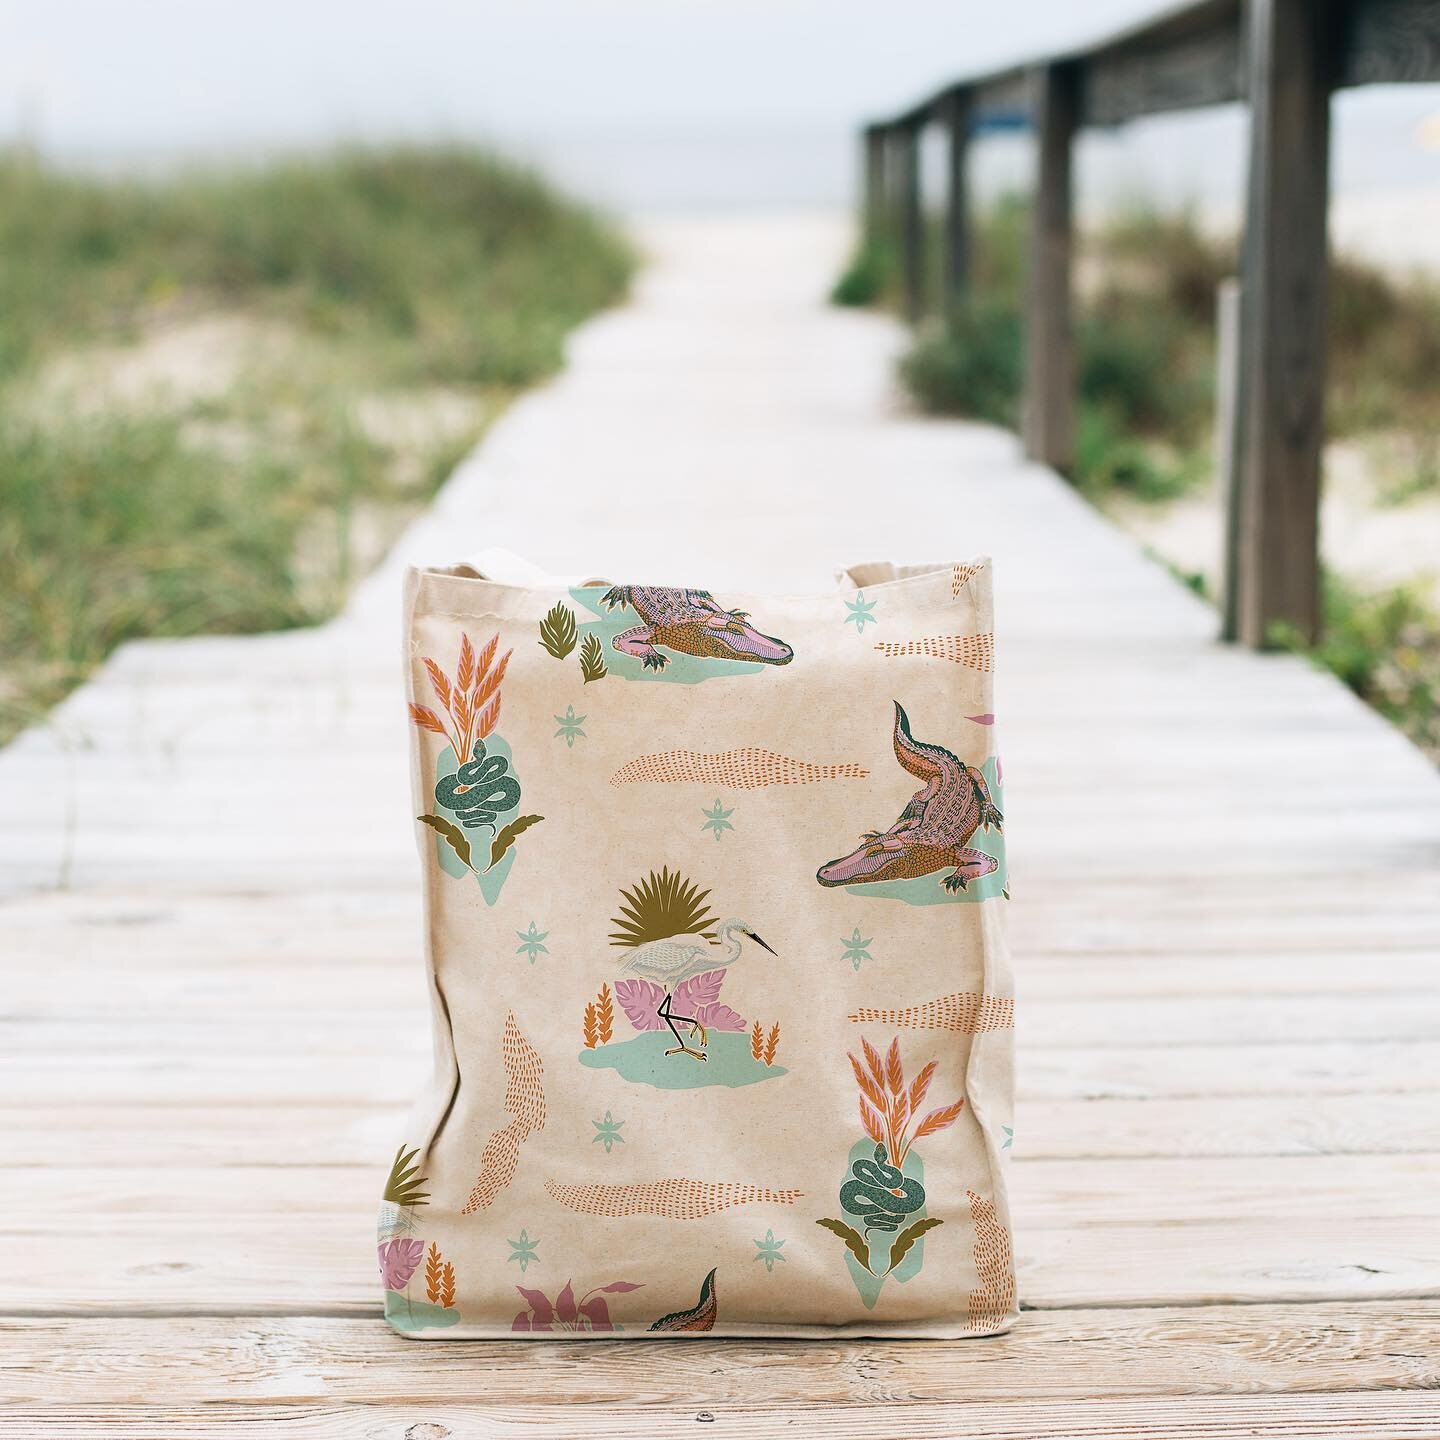 Trying out my Everglade pattern on this tote! 

It makes me feel like packing a picnic and heading to the soft sandy beaches of the Florida to watch the sunset. 
________________________________________________________________________________________